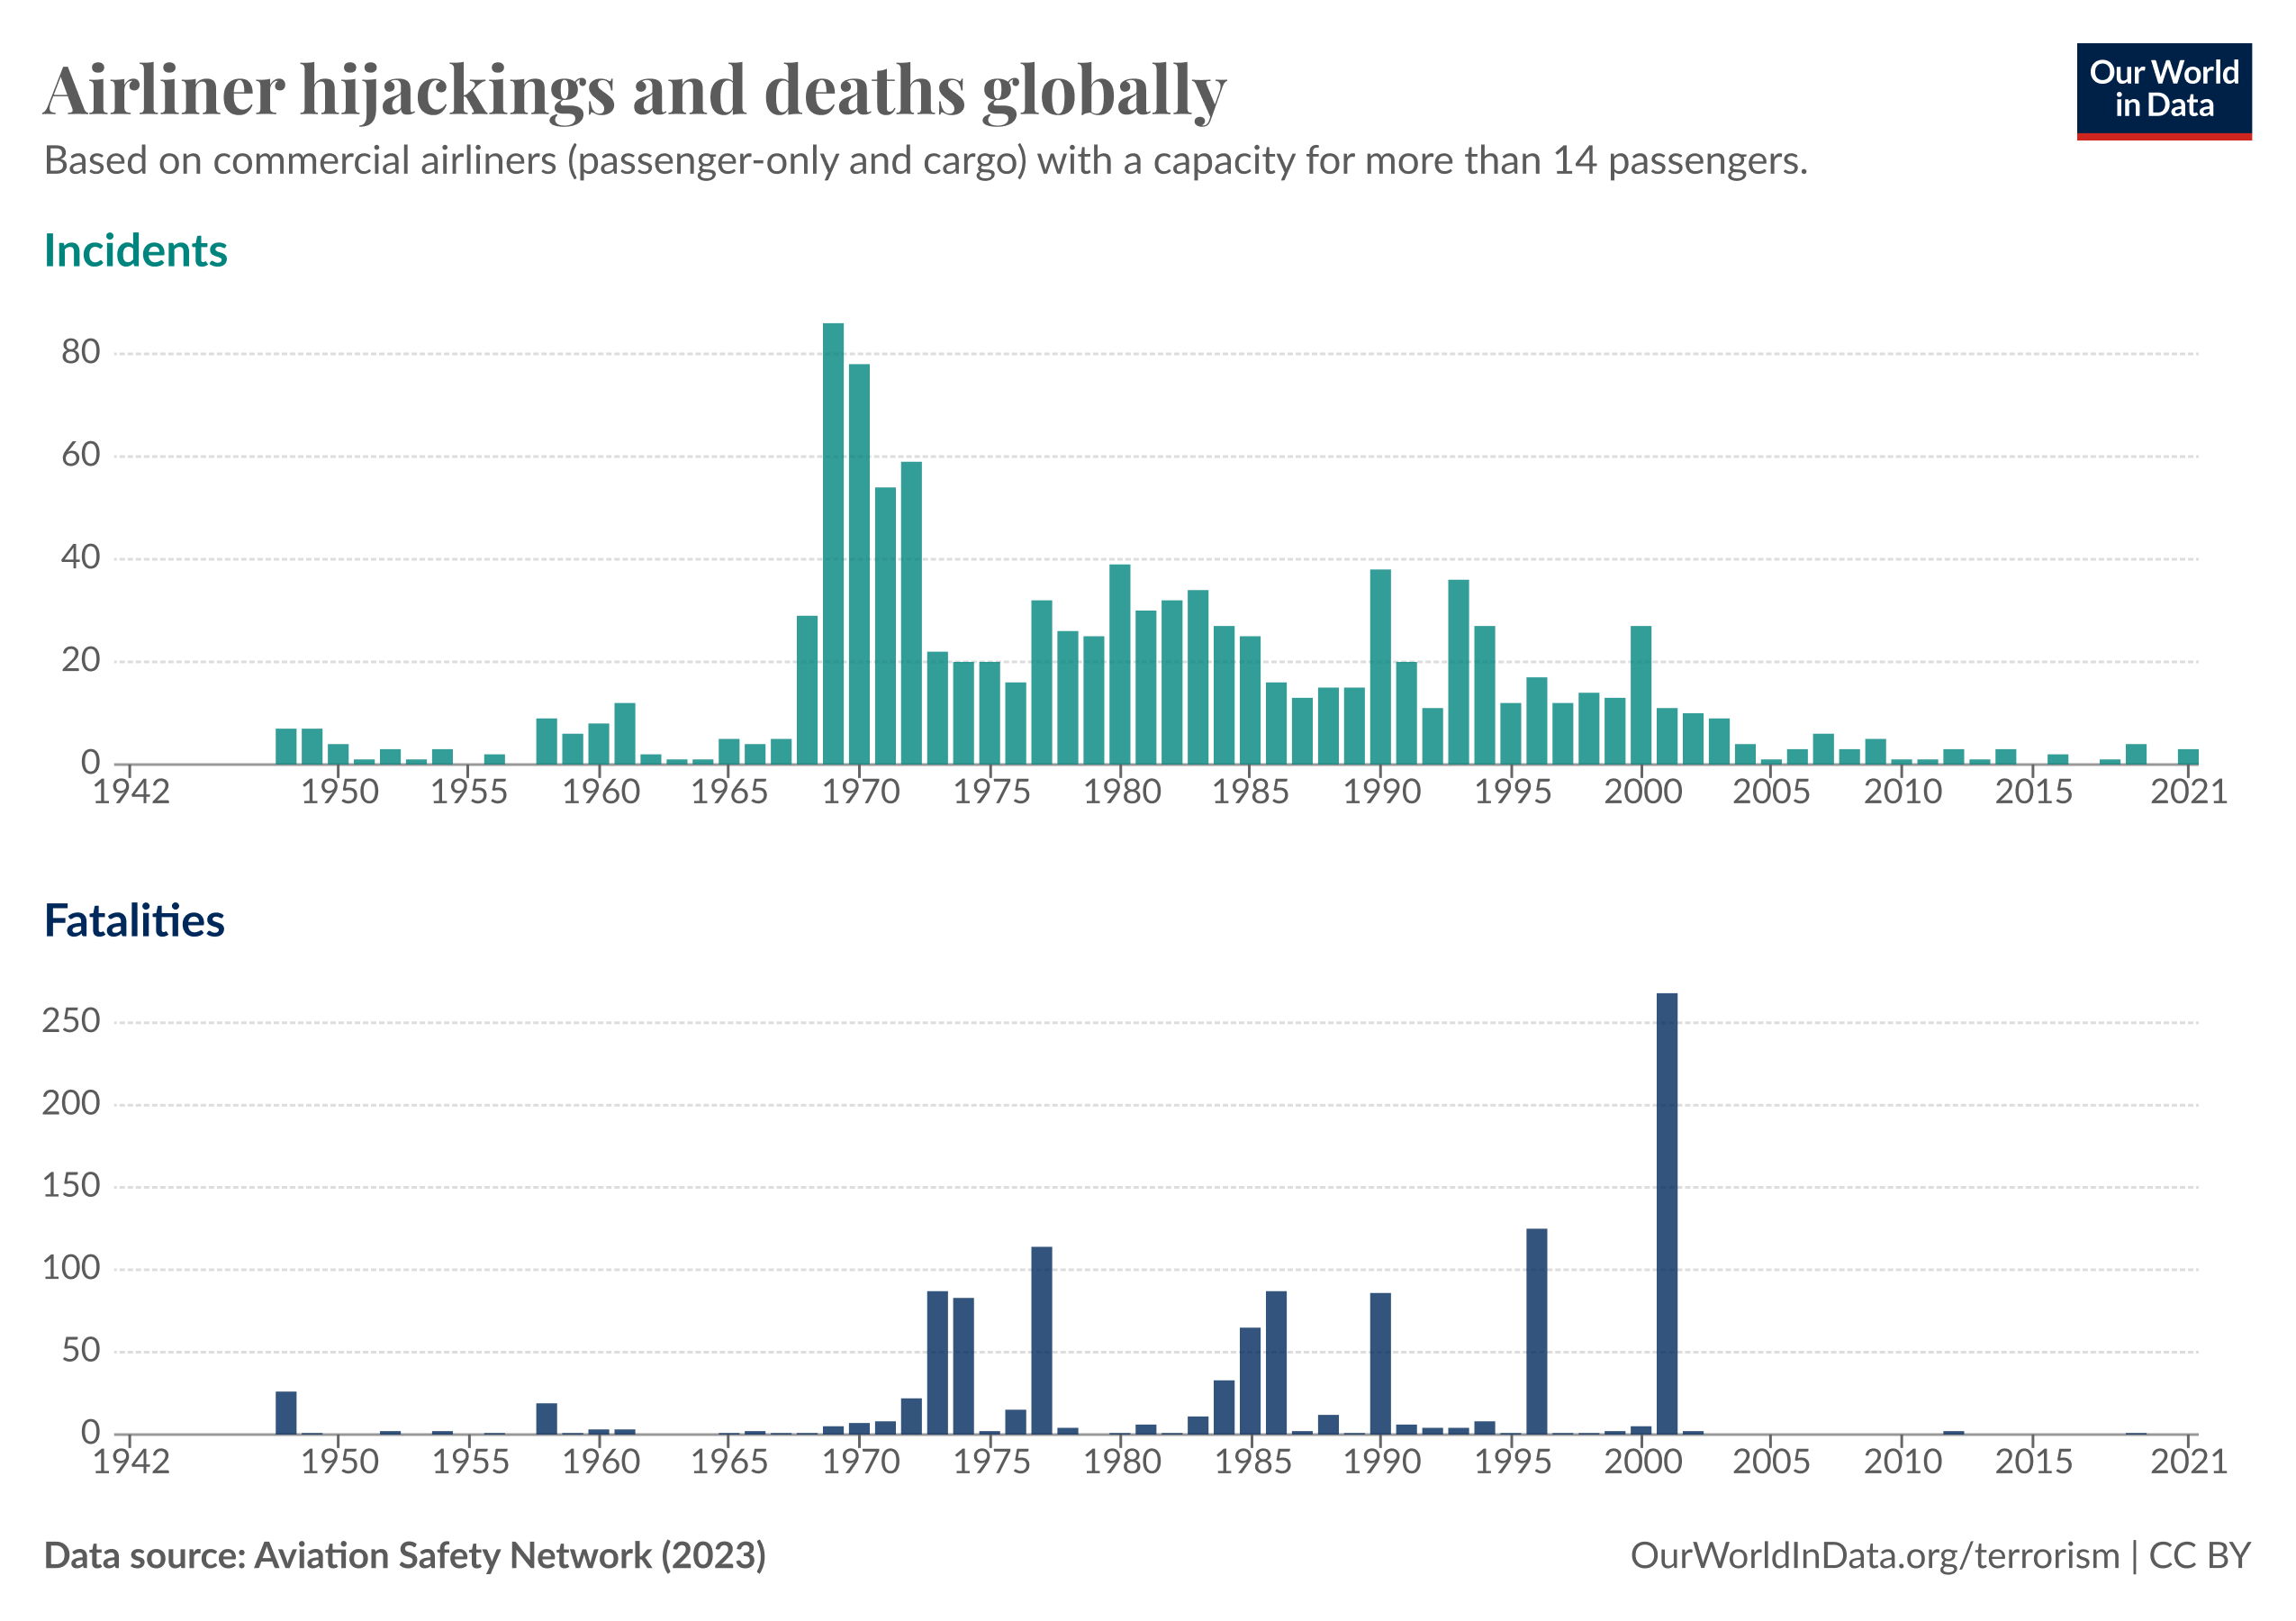 Bar chart displaying airliner hijackings and deaths globally from 1942 to 2021. The top bar chart, labeled 'Incidents,' shows the number of hijackings per year. There's a noticeable peak in incidents during the late 1960s and early 1970s, with a gradual decline thereafter. The number of incidents drops significantly after the year 2000. The lower bar chart, labeled 'Fatalities,' shows the number of deaths per year due to hijackings. After 2001, the number of fatalities decreases. The data source is the Aviation Safety Network (2023), and the chart is credited to OurWorldInData.org/terrorism, under CC BY license